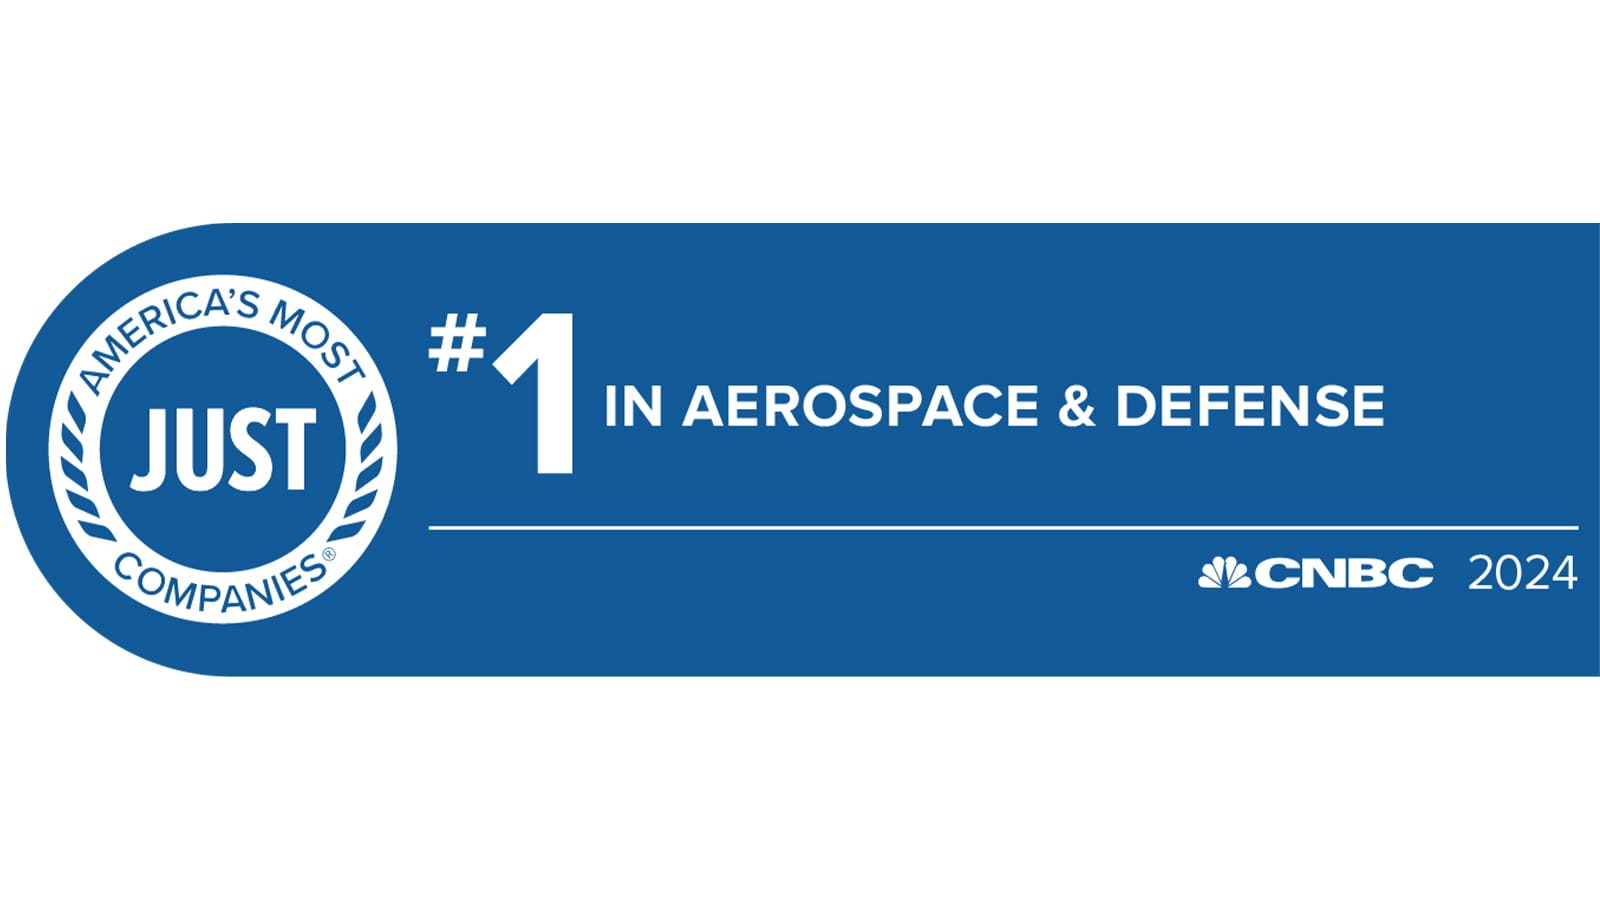 CNBC Americas most just companies 1 in aerospace and defense